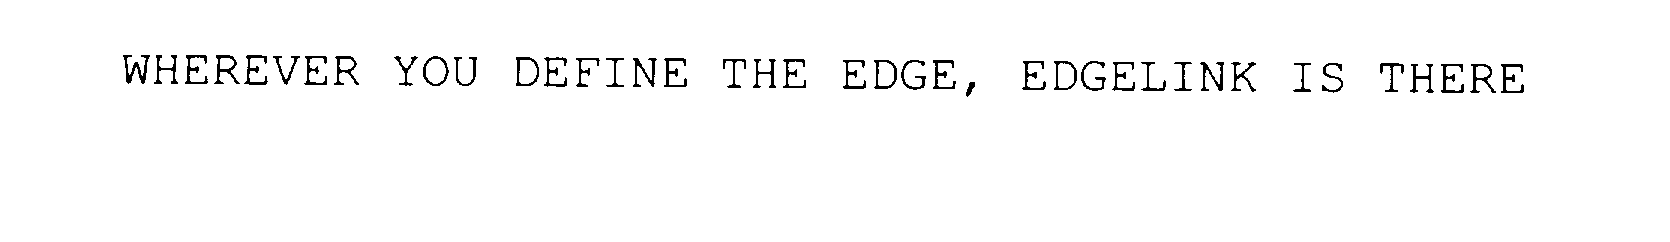  WHEREVER YOU DEFINE THE EDGE, EDGELINK IS THERE